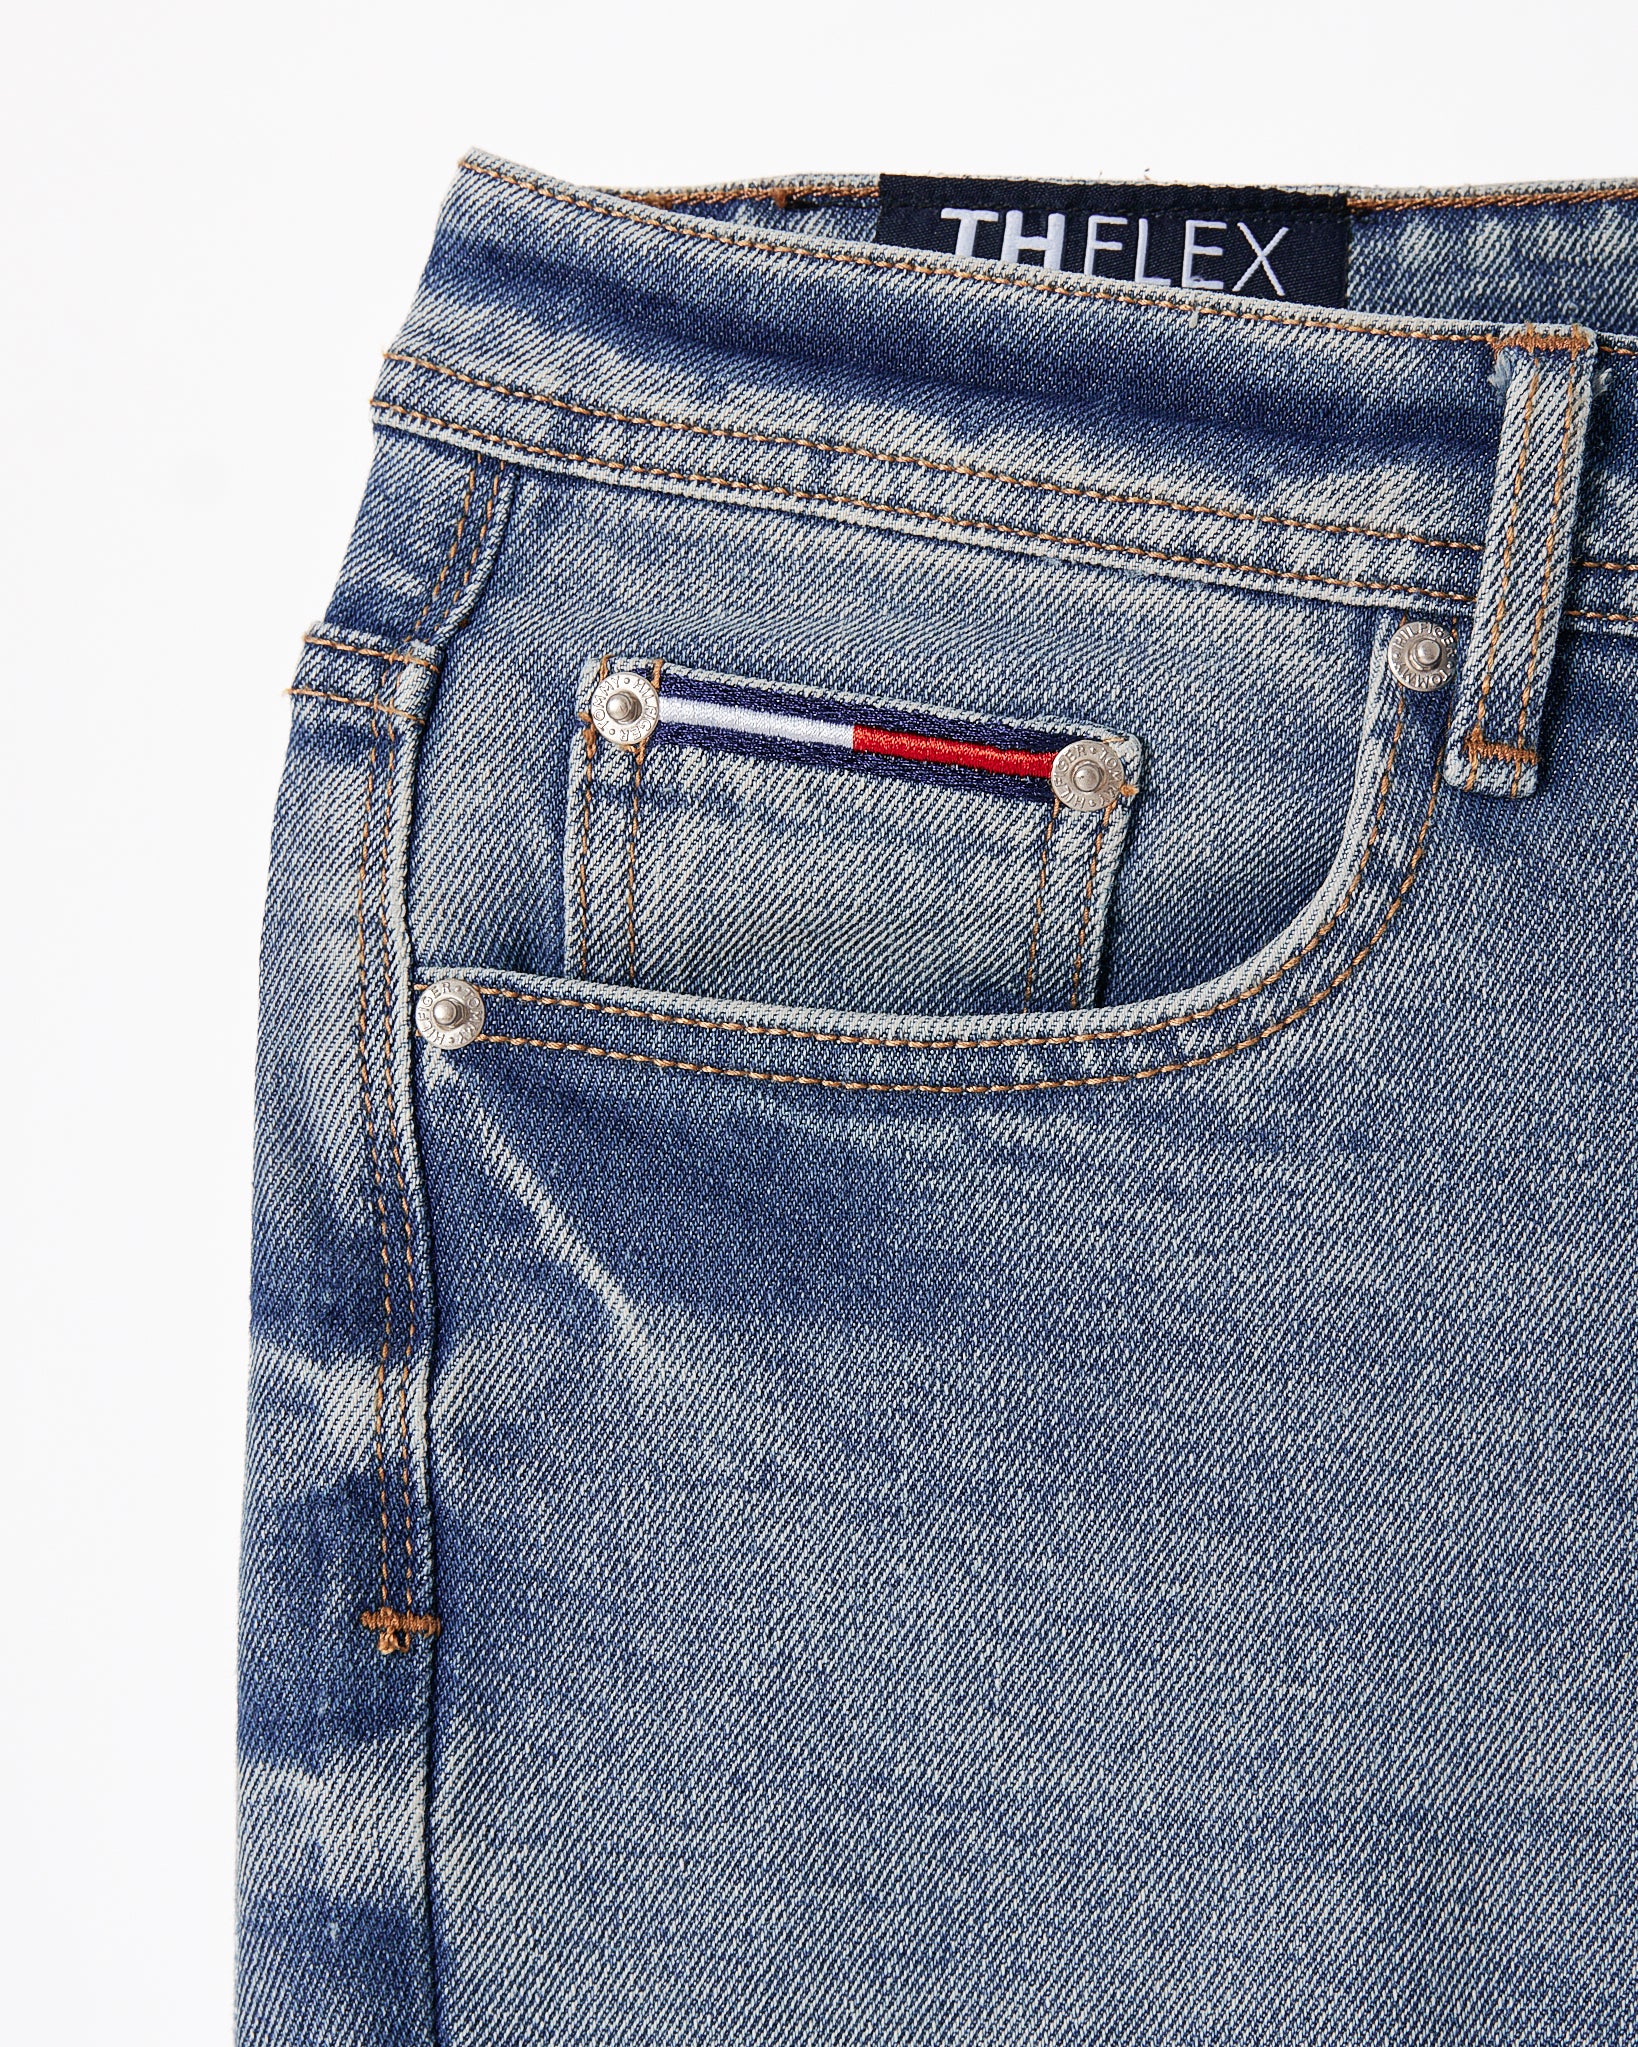 TH Flag Embroidered Distressed  Men Blue Slim Fit Jeans 25.90